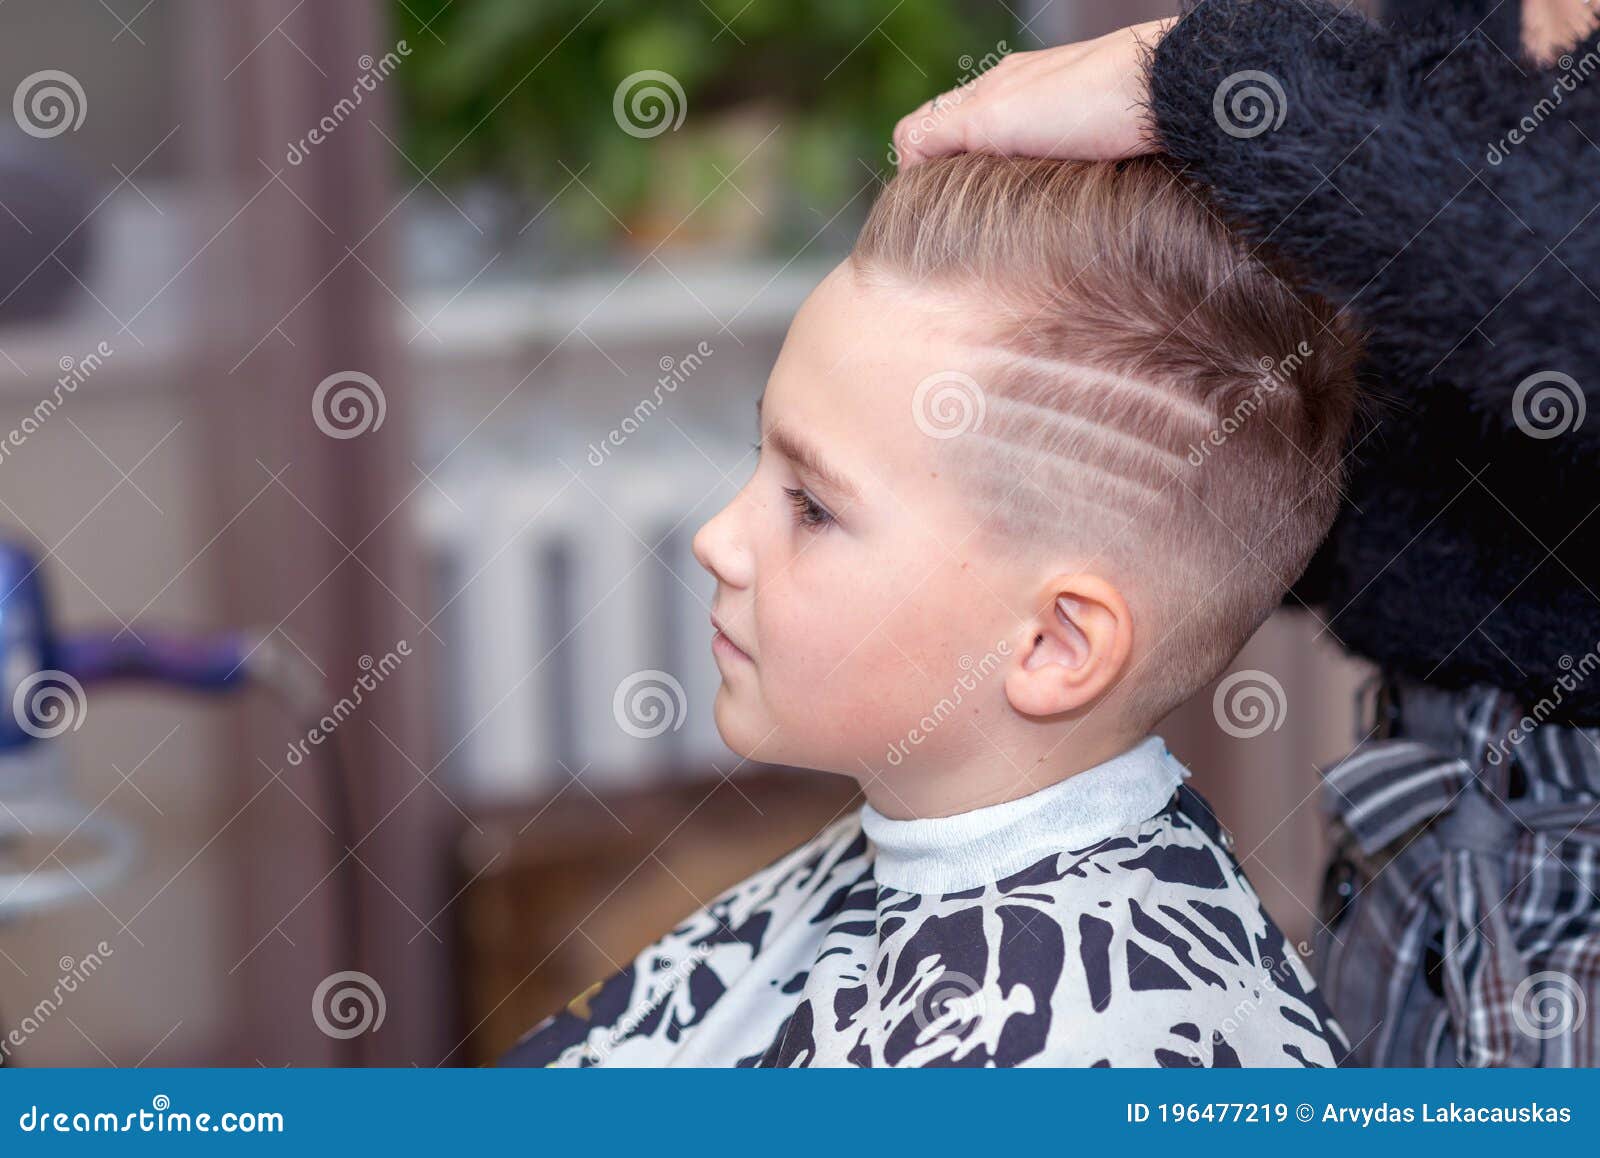 Boy's Haircut with hard part and design - Bangstyle - House of Hair  Inspiration